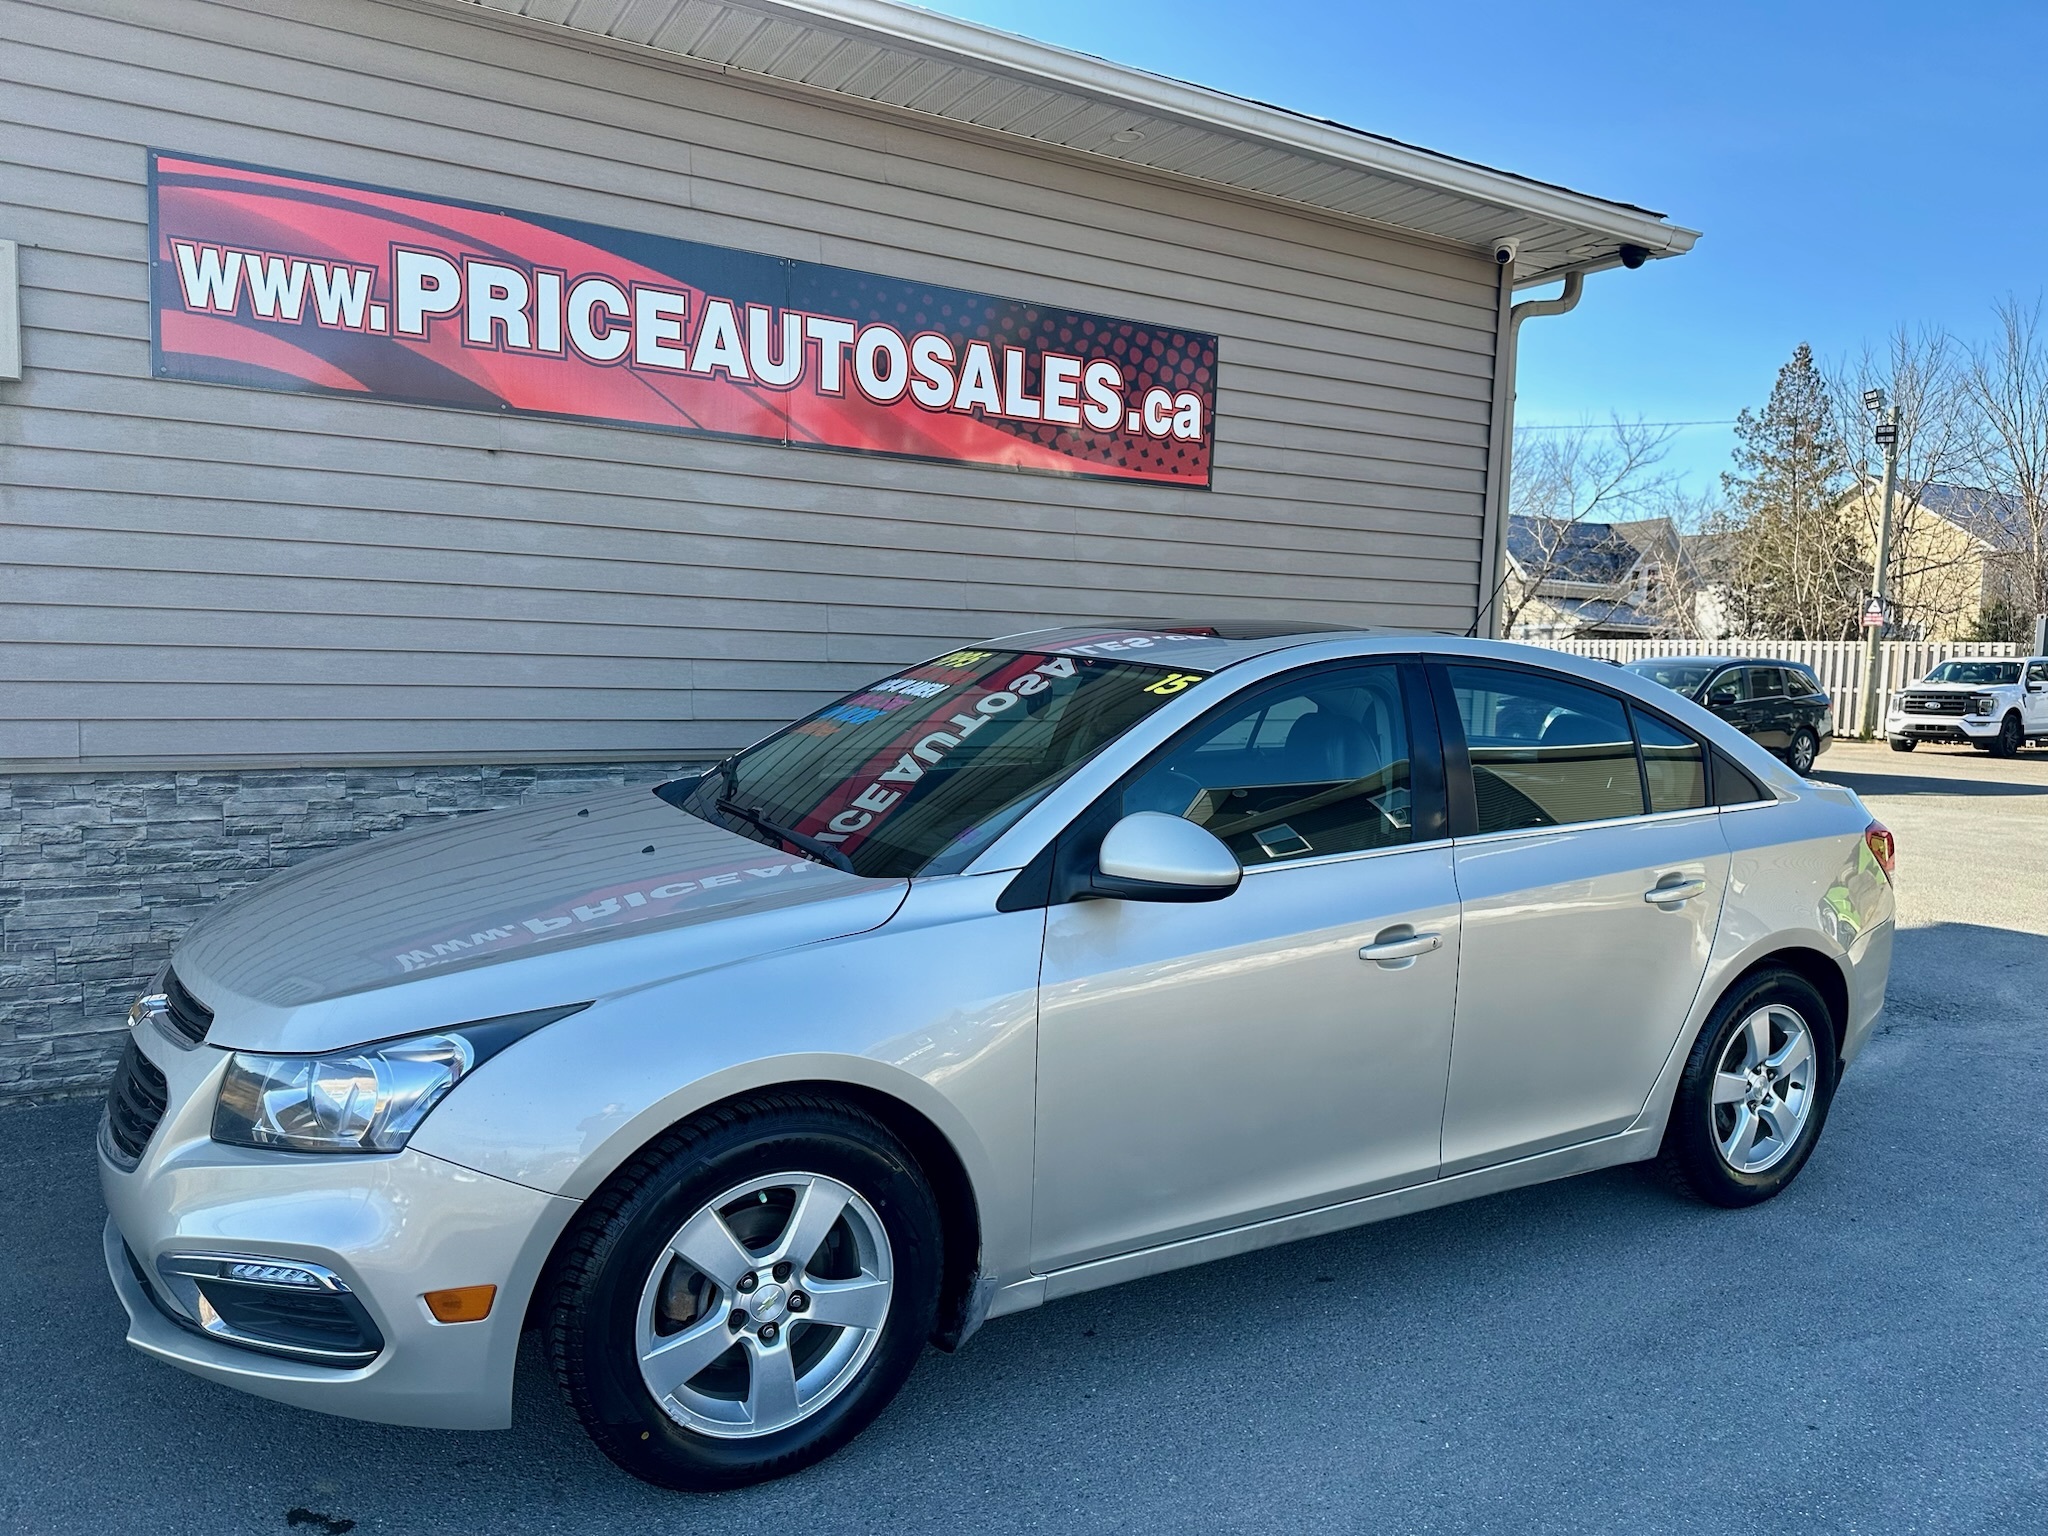 2015 Chevrolet Cruze LT - HEATED LEATHER - SUNROOF - CAM - REMOTE